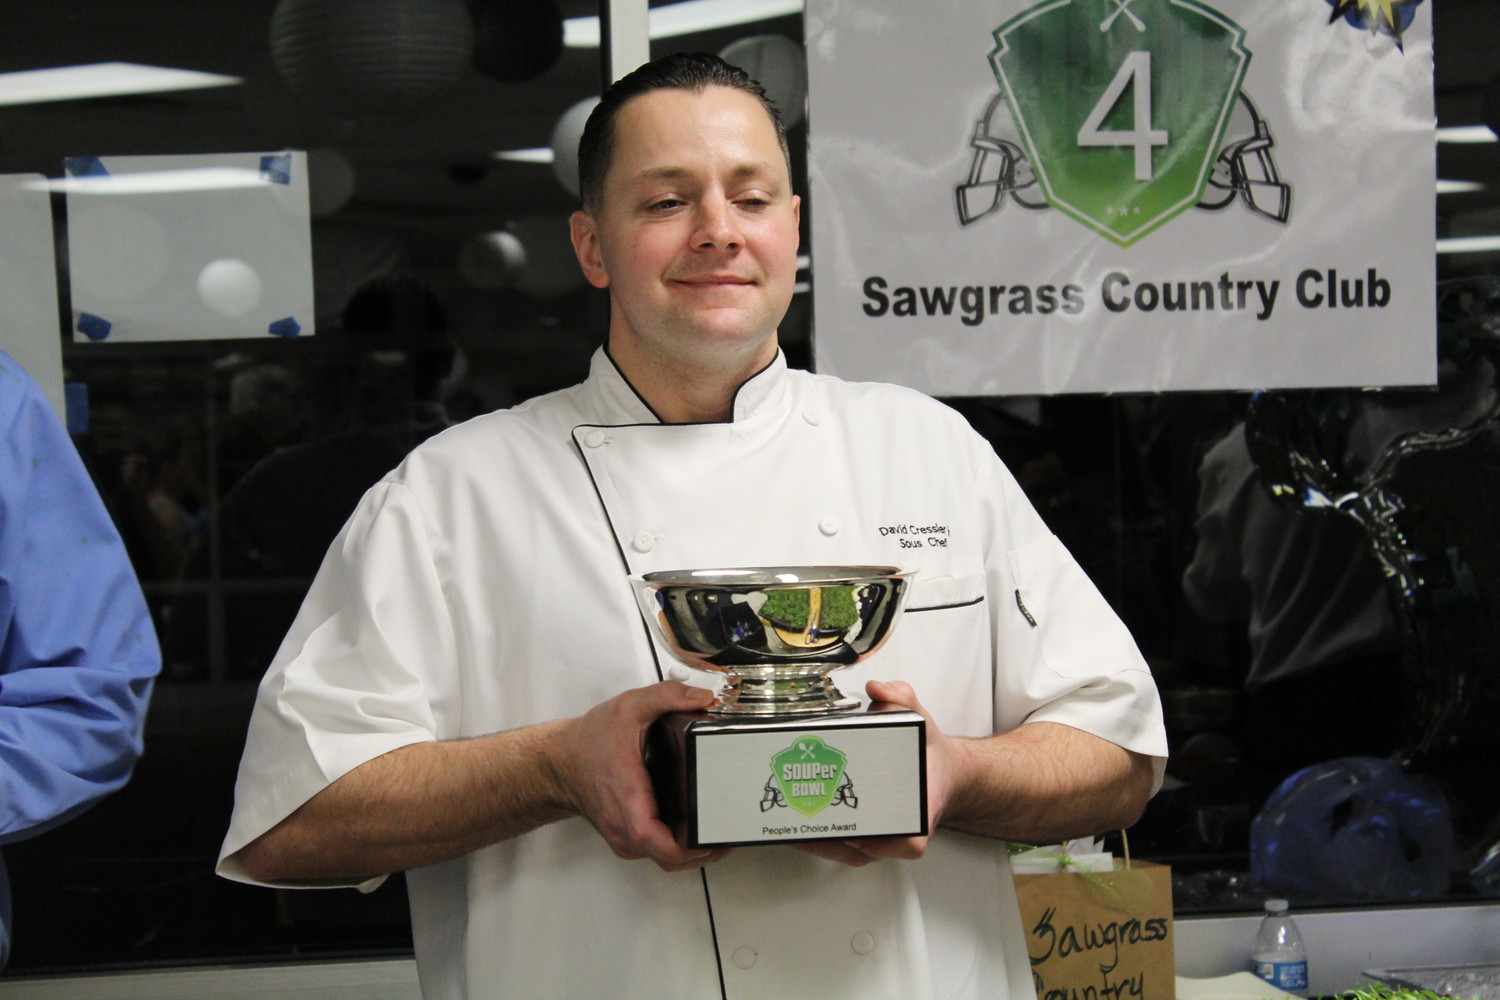 The SOUPer Bowl 2018 People's Choice winner was the Sawgrass Country Club. Proceeds from the event benefit First Coast Blessings in a Backpack